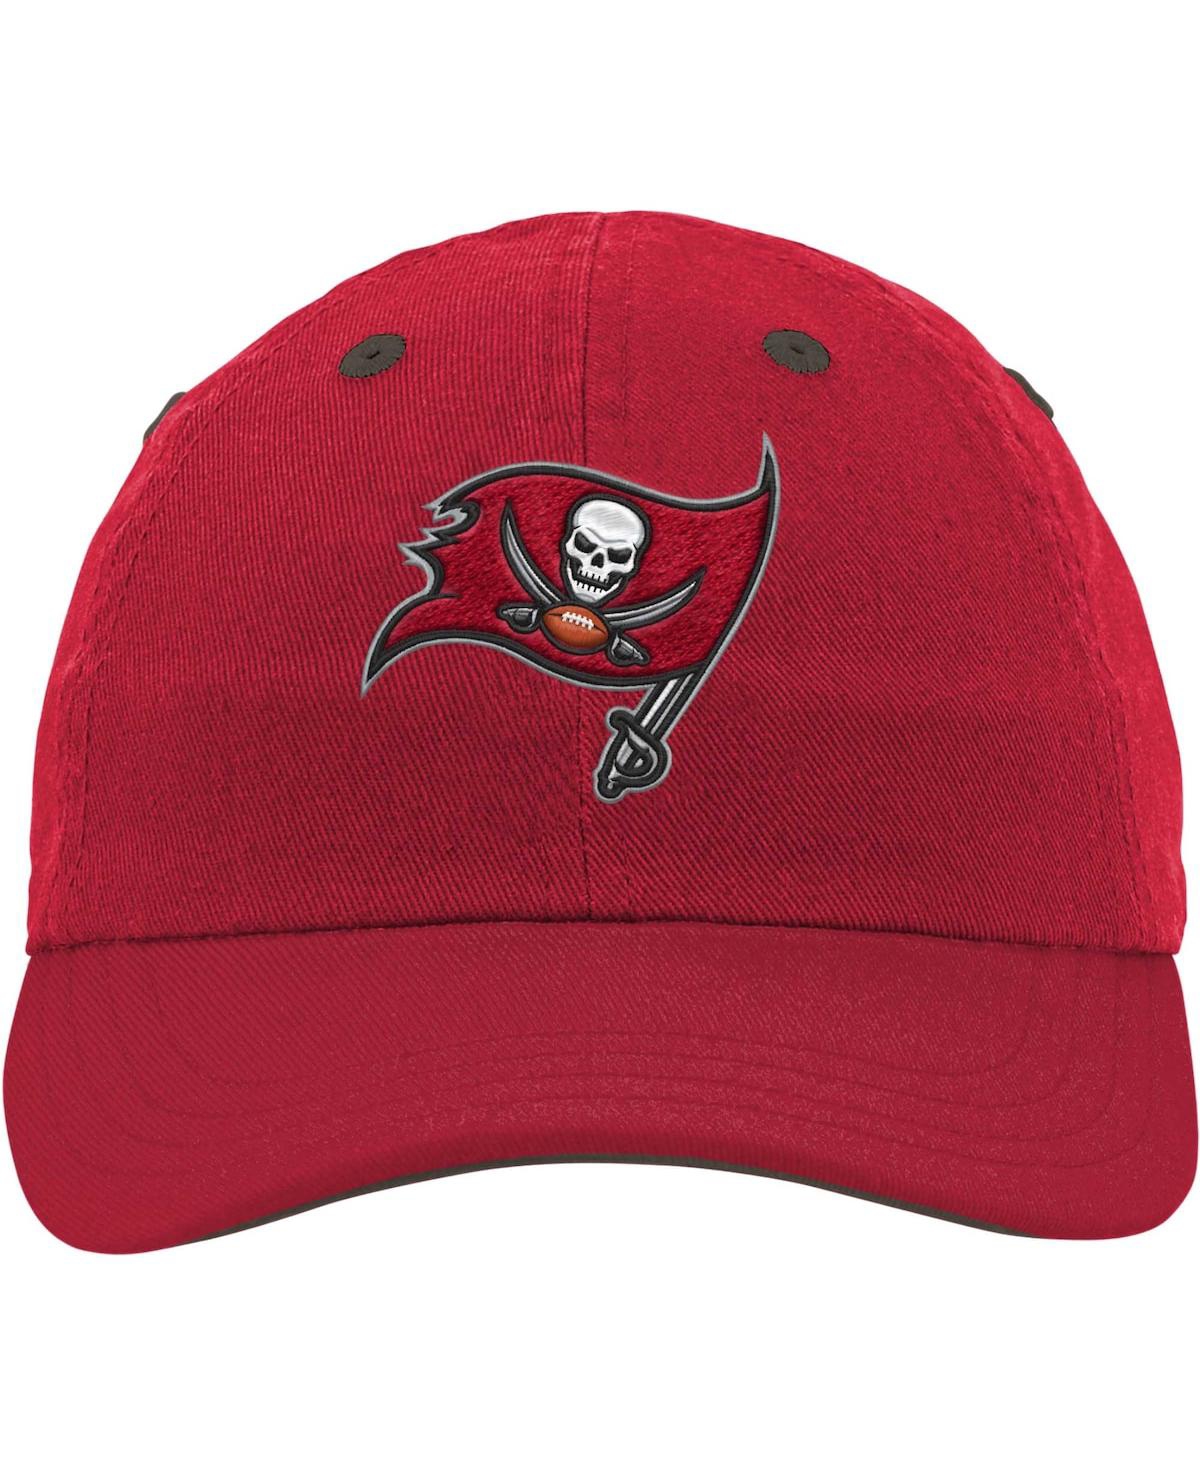 Shop Outerstuff Boys And Girls Infant Red Tampa Bay Buccaneers Team Slouch Flex Hat